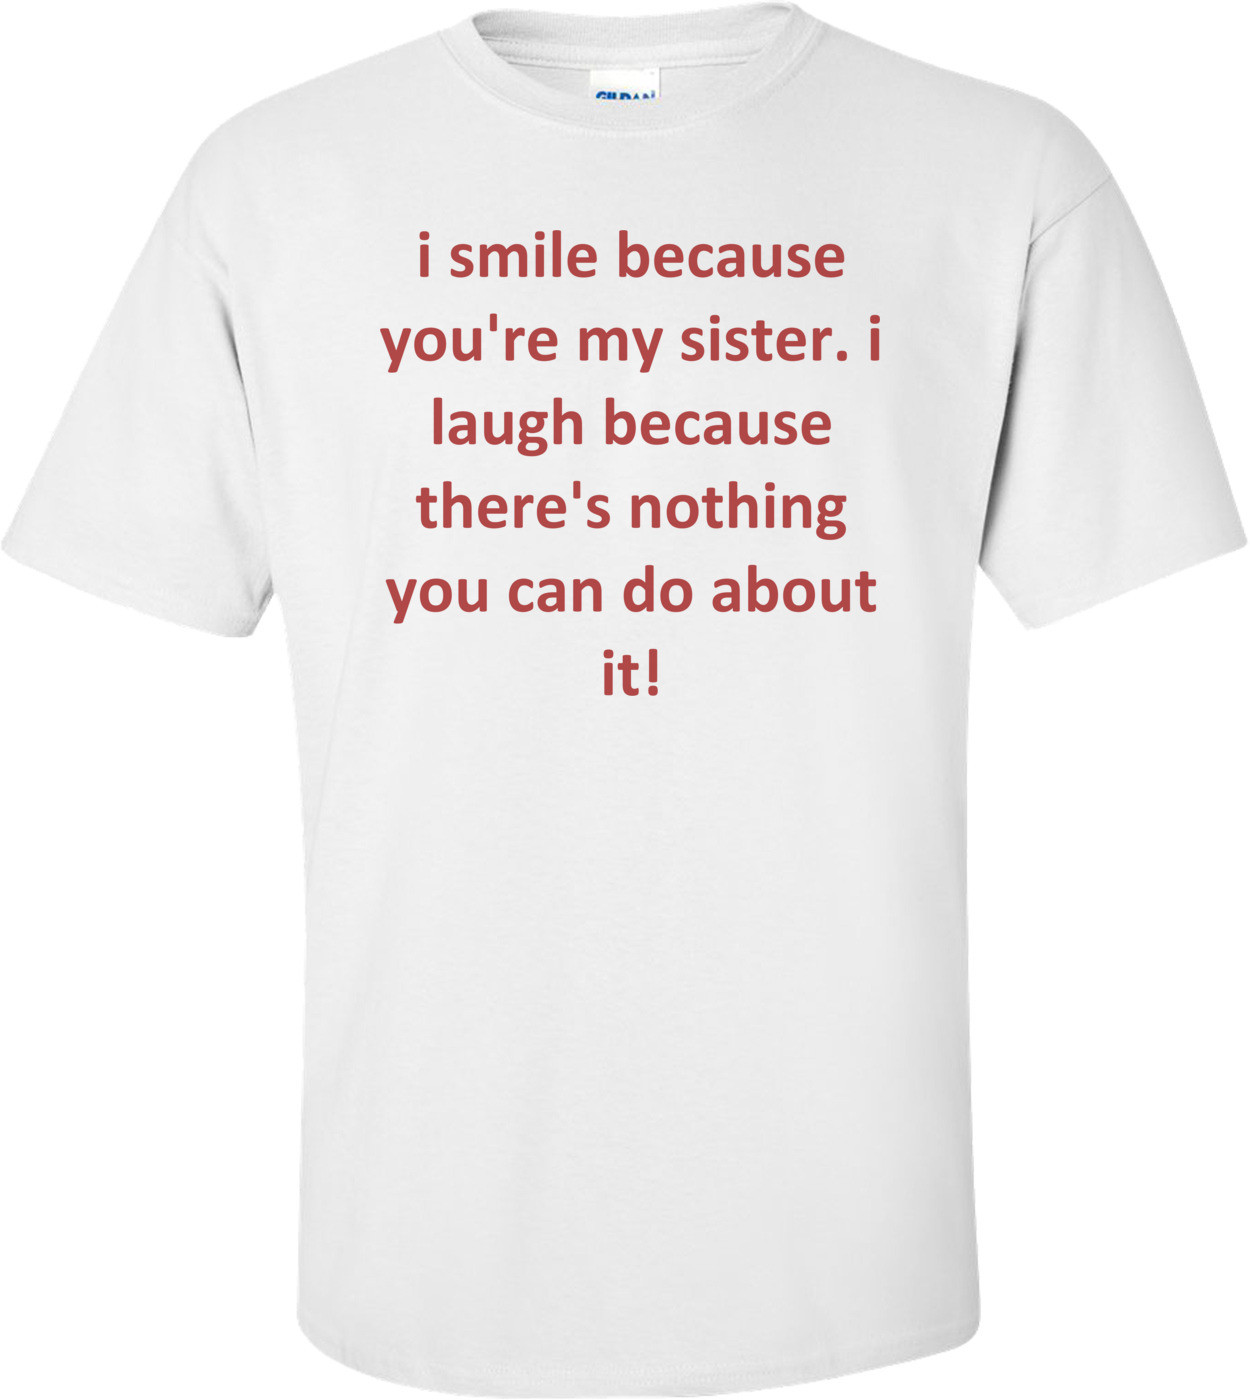 I Smile Because You're My Sister. I Laugh Because There's Nothing You Can Do About It! Shirt